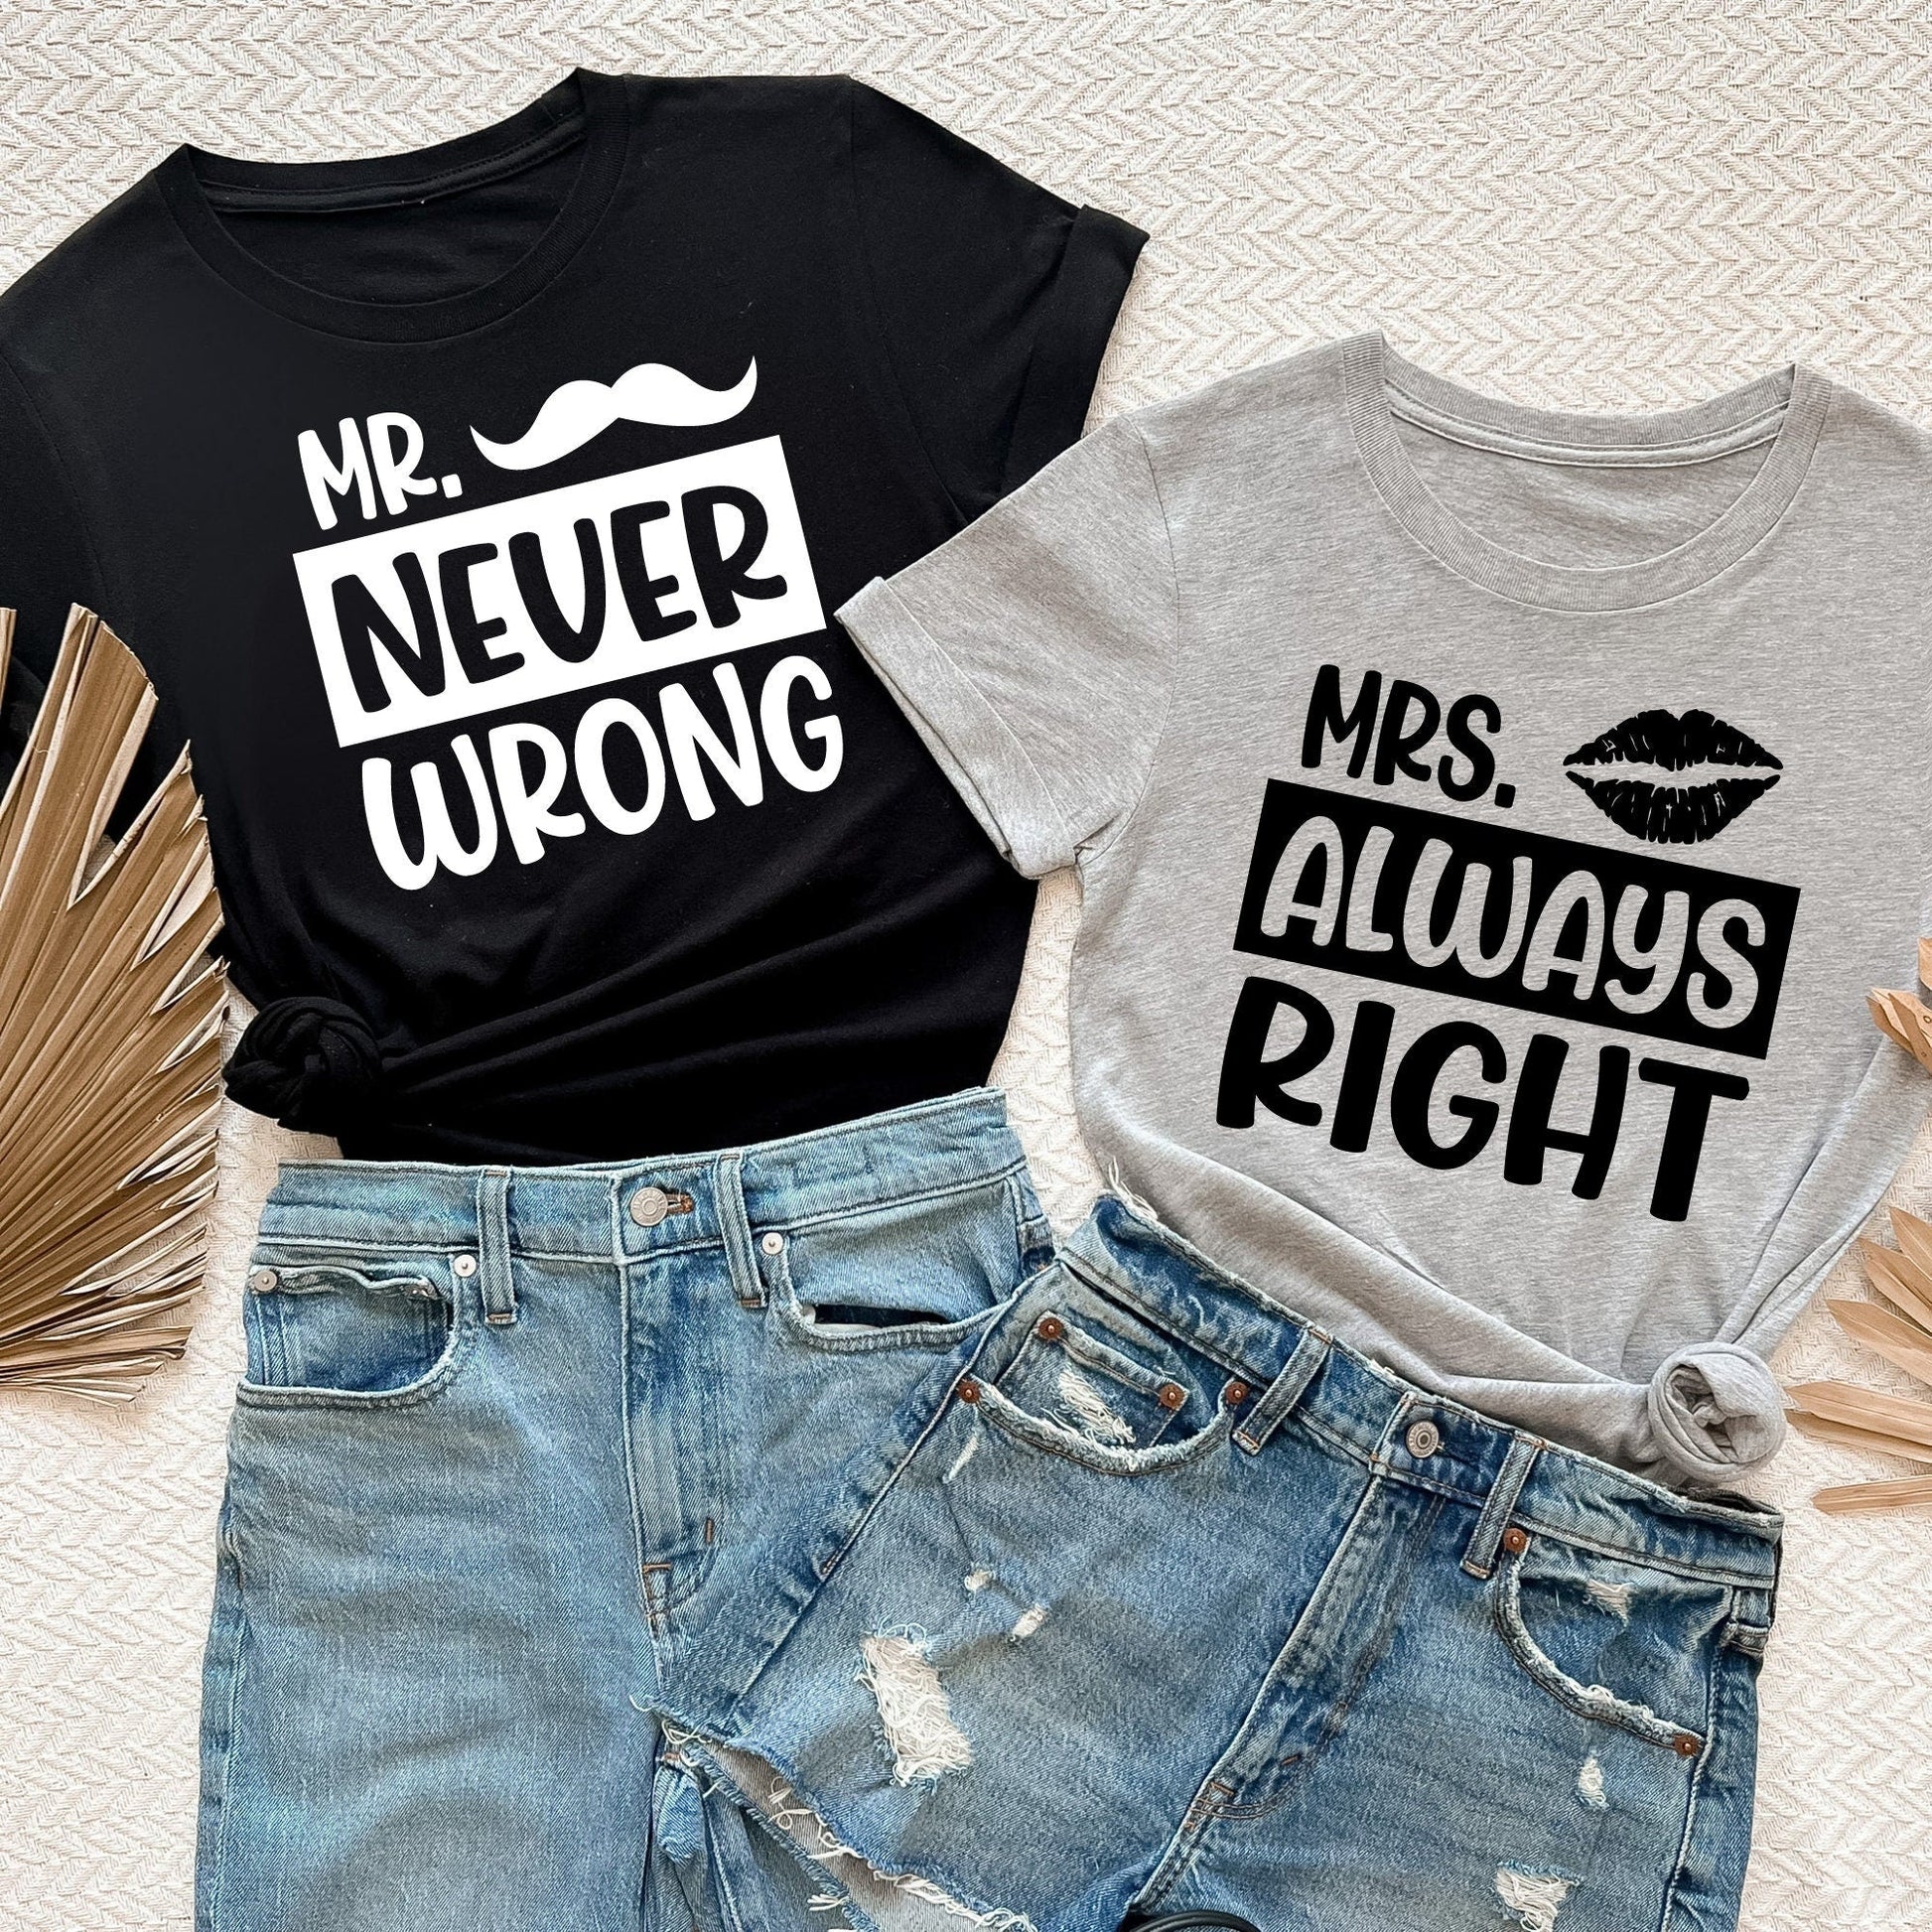 Mr. Wrong and Mrs. Right Funny Couples Shirts